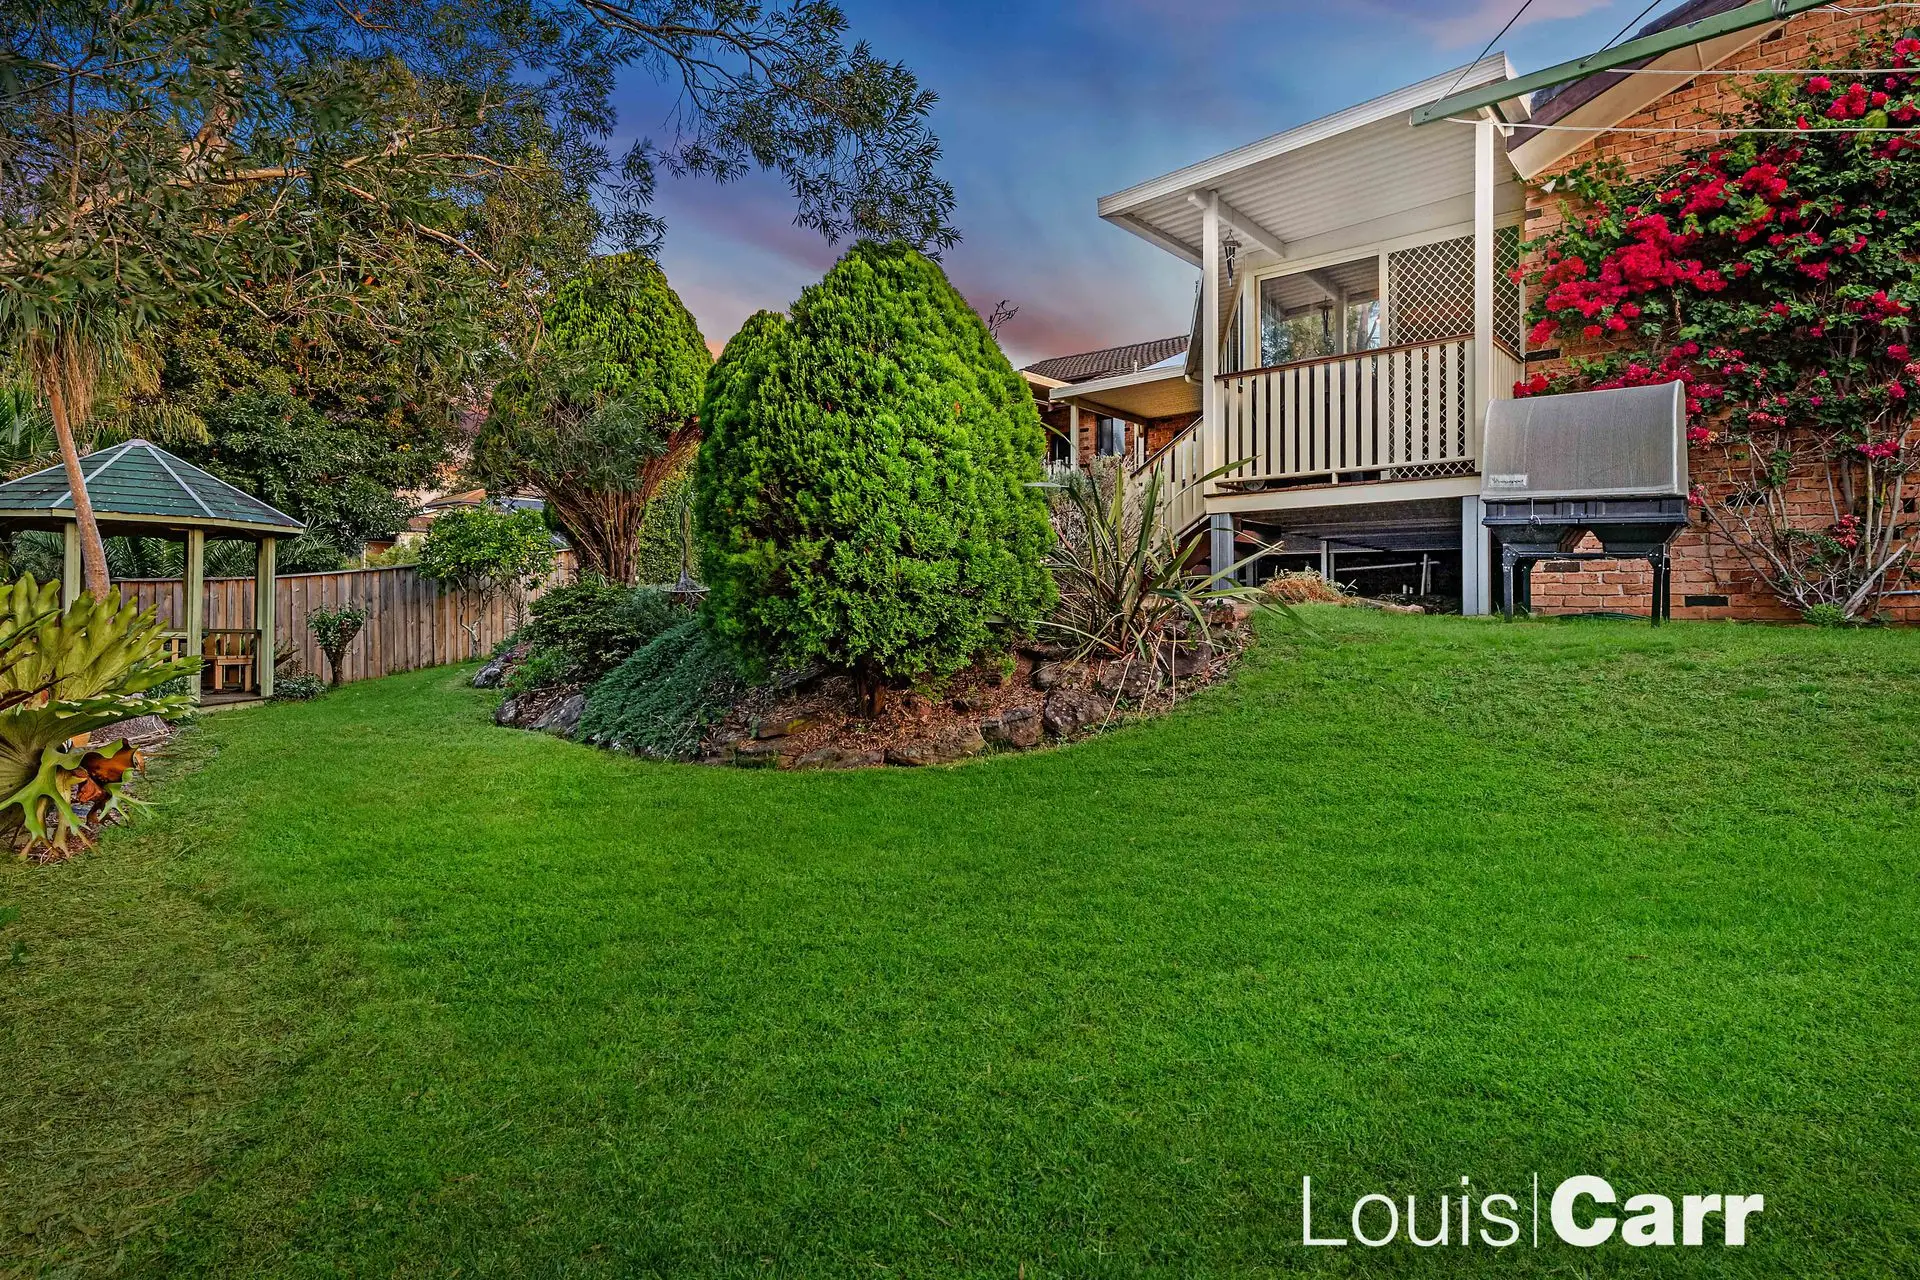 Photo #14: 4 Anne William Drive, West Pennant Hills - Sold by Louis Carr Real Estate